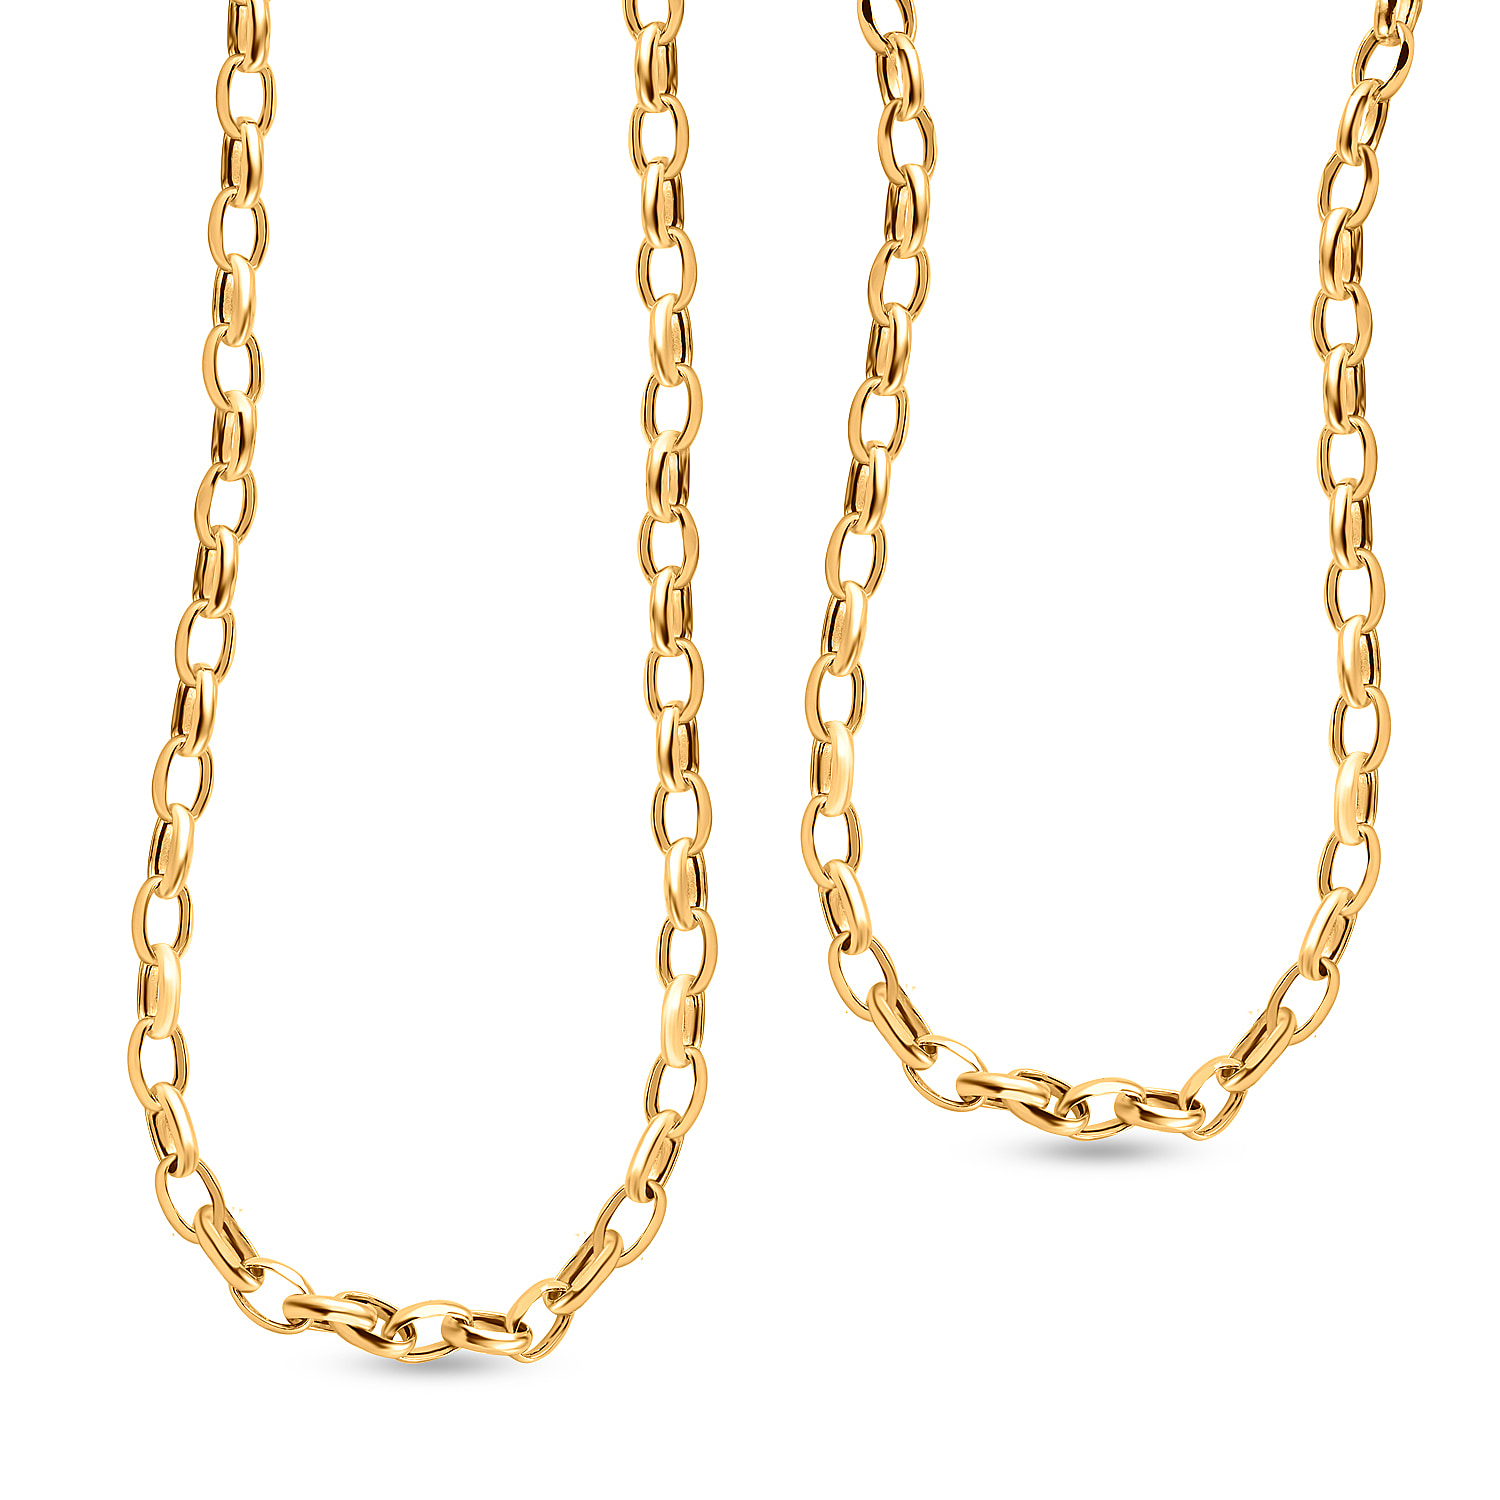 Vicenza Closeout - 9K Yellow Gold Bevelled Belcher Necklace (Size - 24) with Spring Ring Clasp